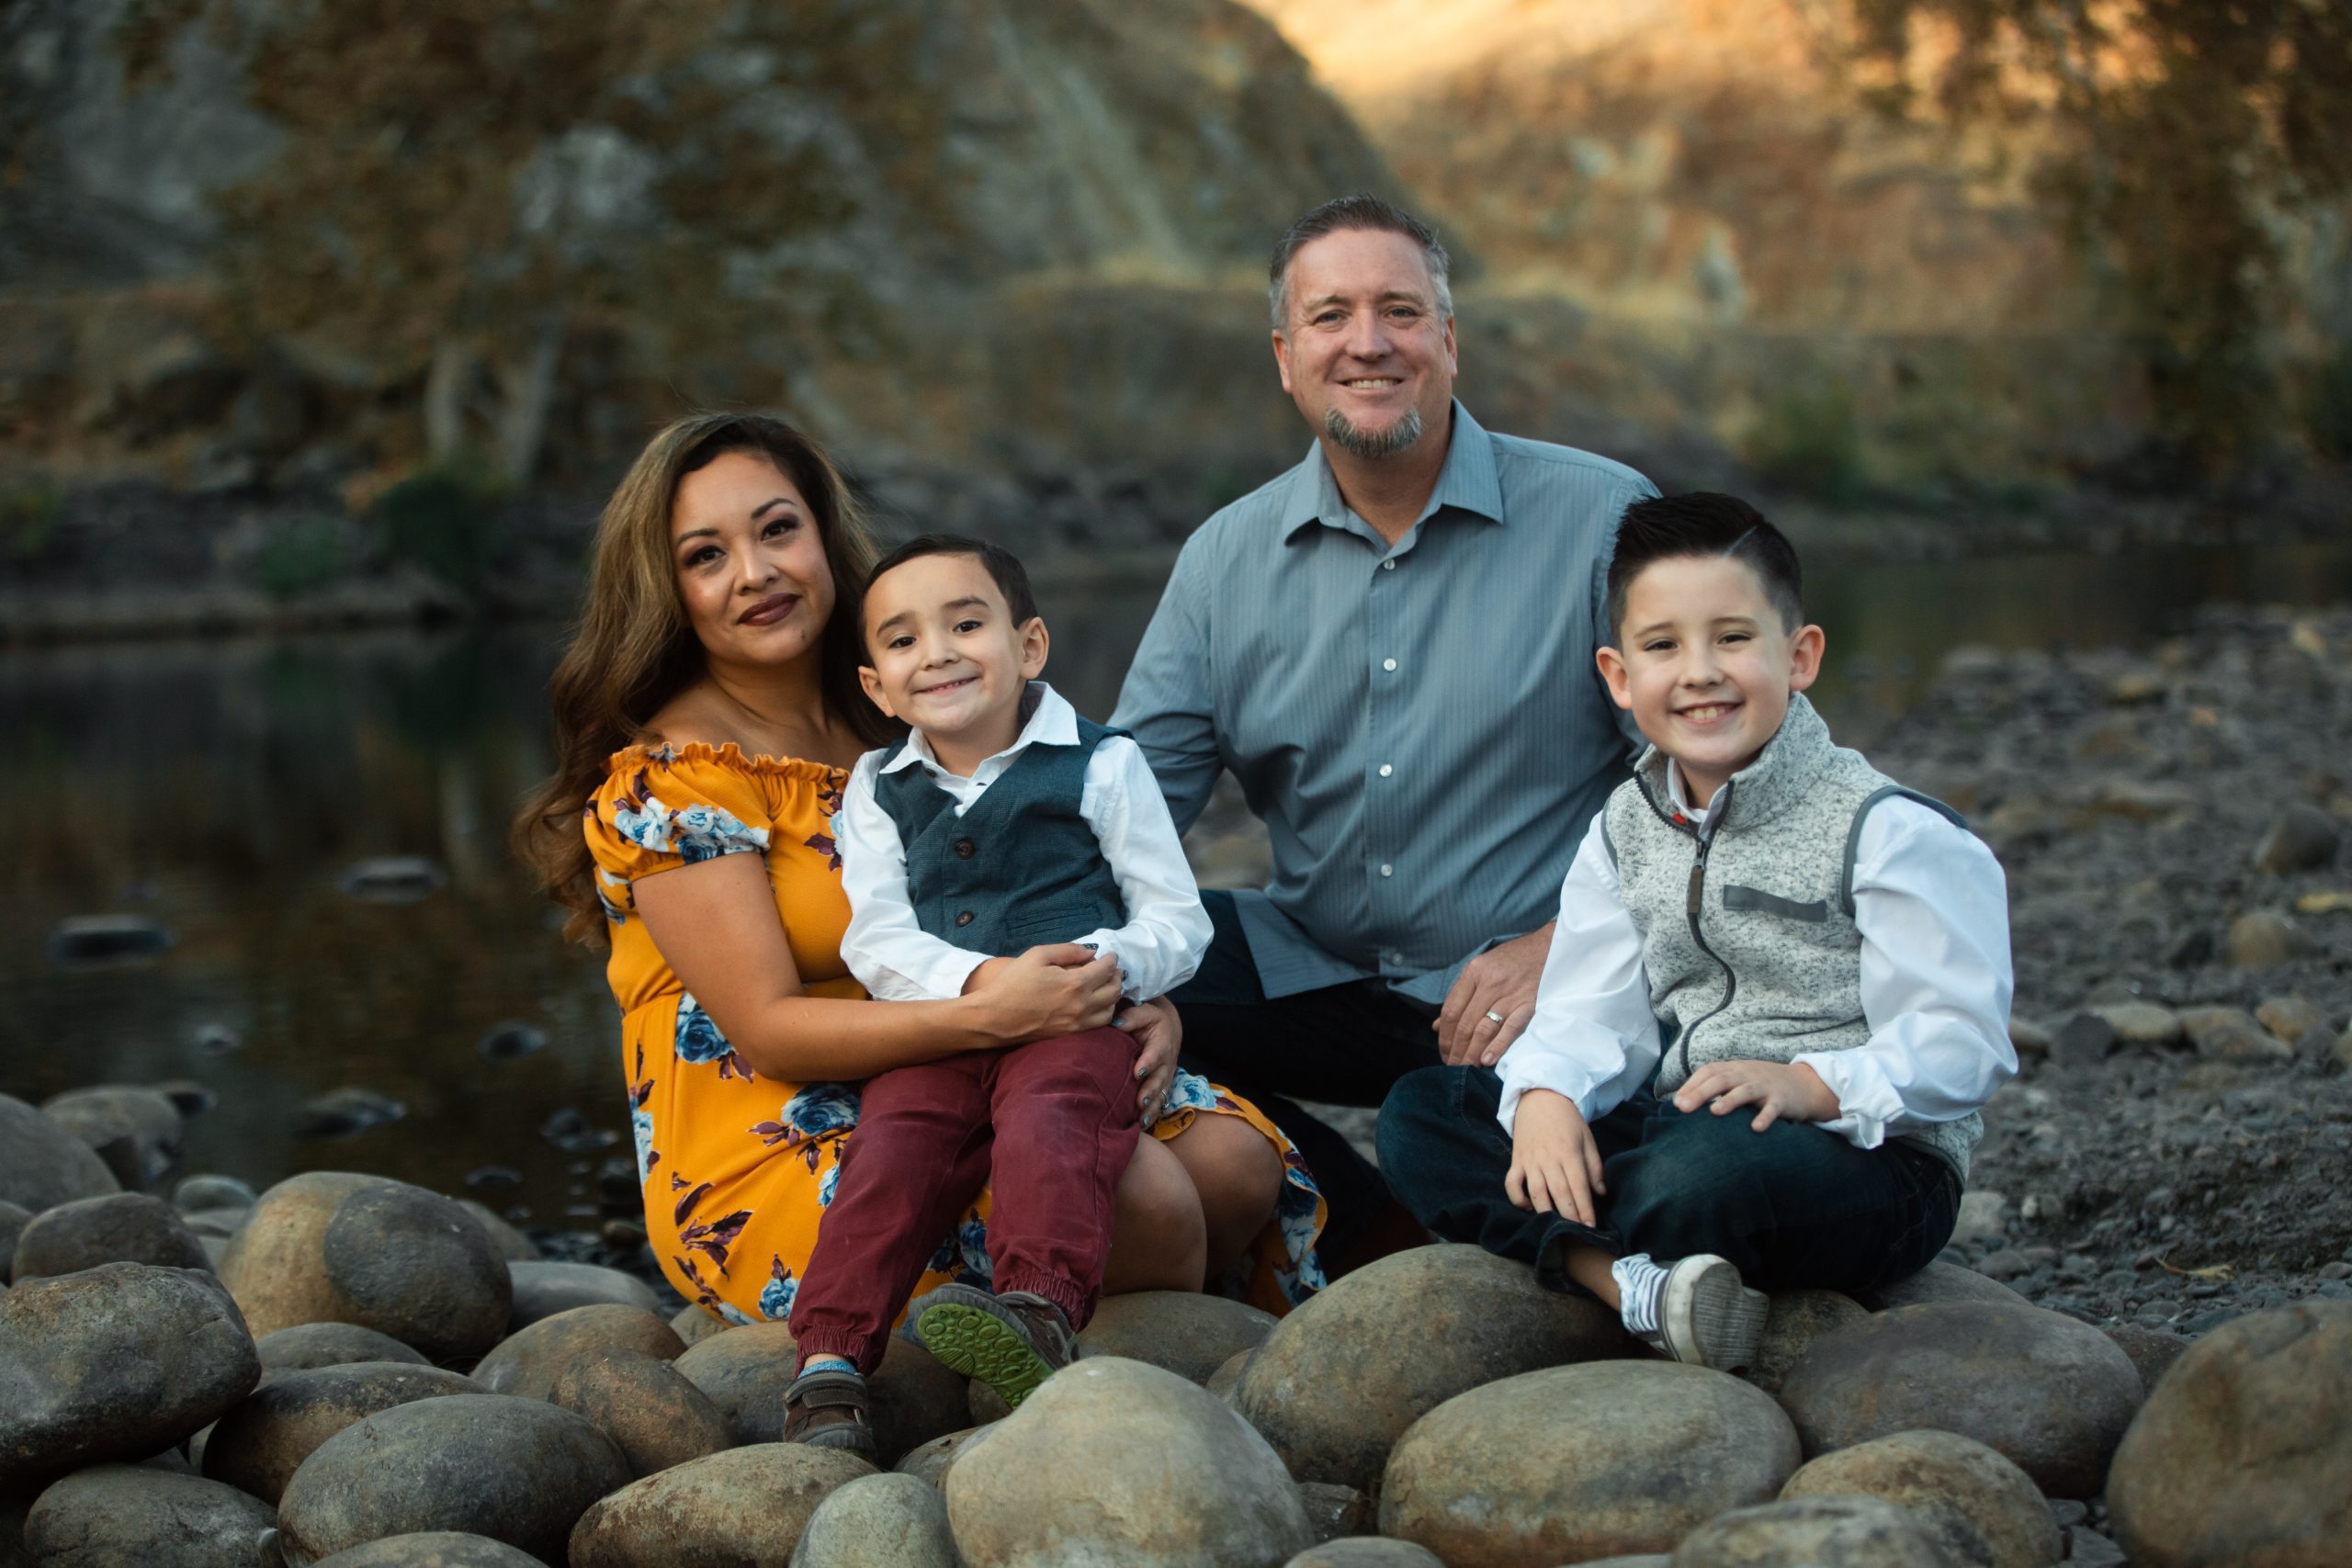 Valarie Melton with her husband and their two young boys sitting on the rocks by the river